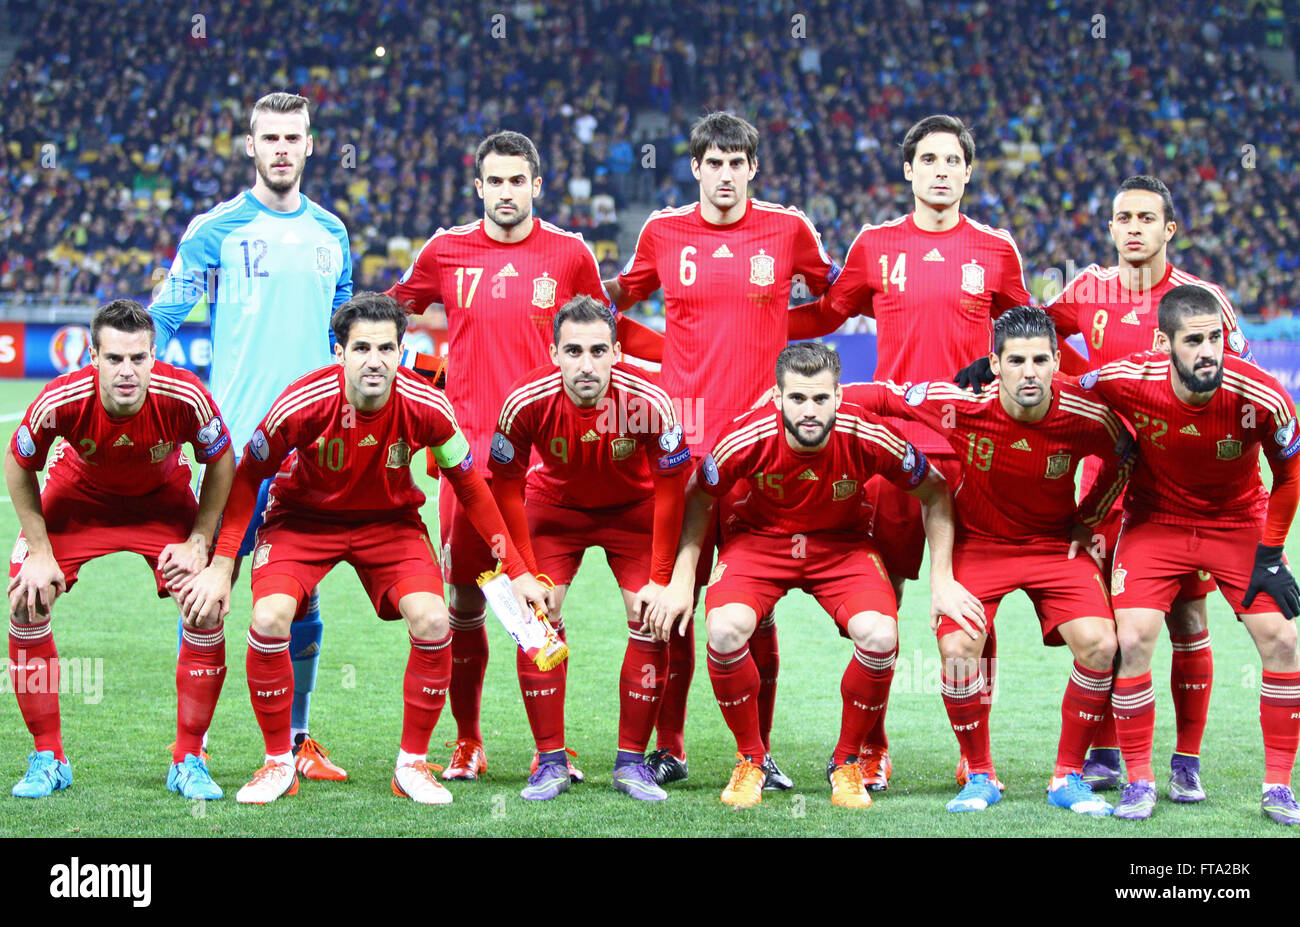 KYIV, UKRAINE - OCTOBER 12, 2015: Players of Spain National football team  pose for a group photo before UEFA EURO 2016 Qualifyin Stock Photo - Alamy